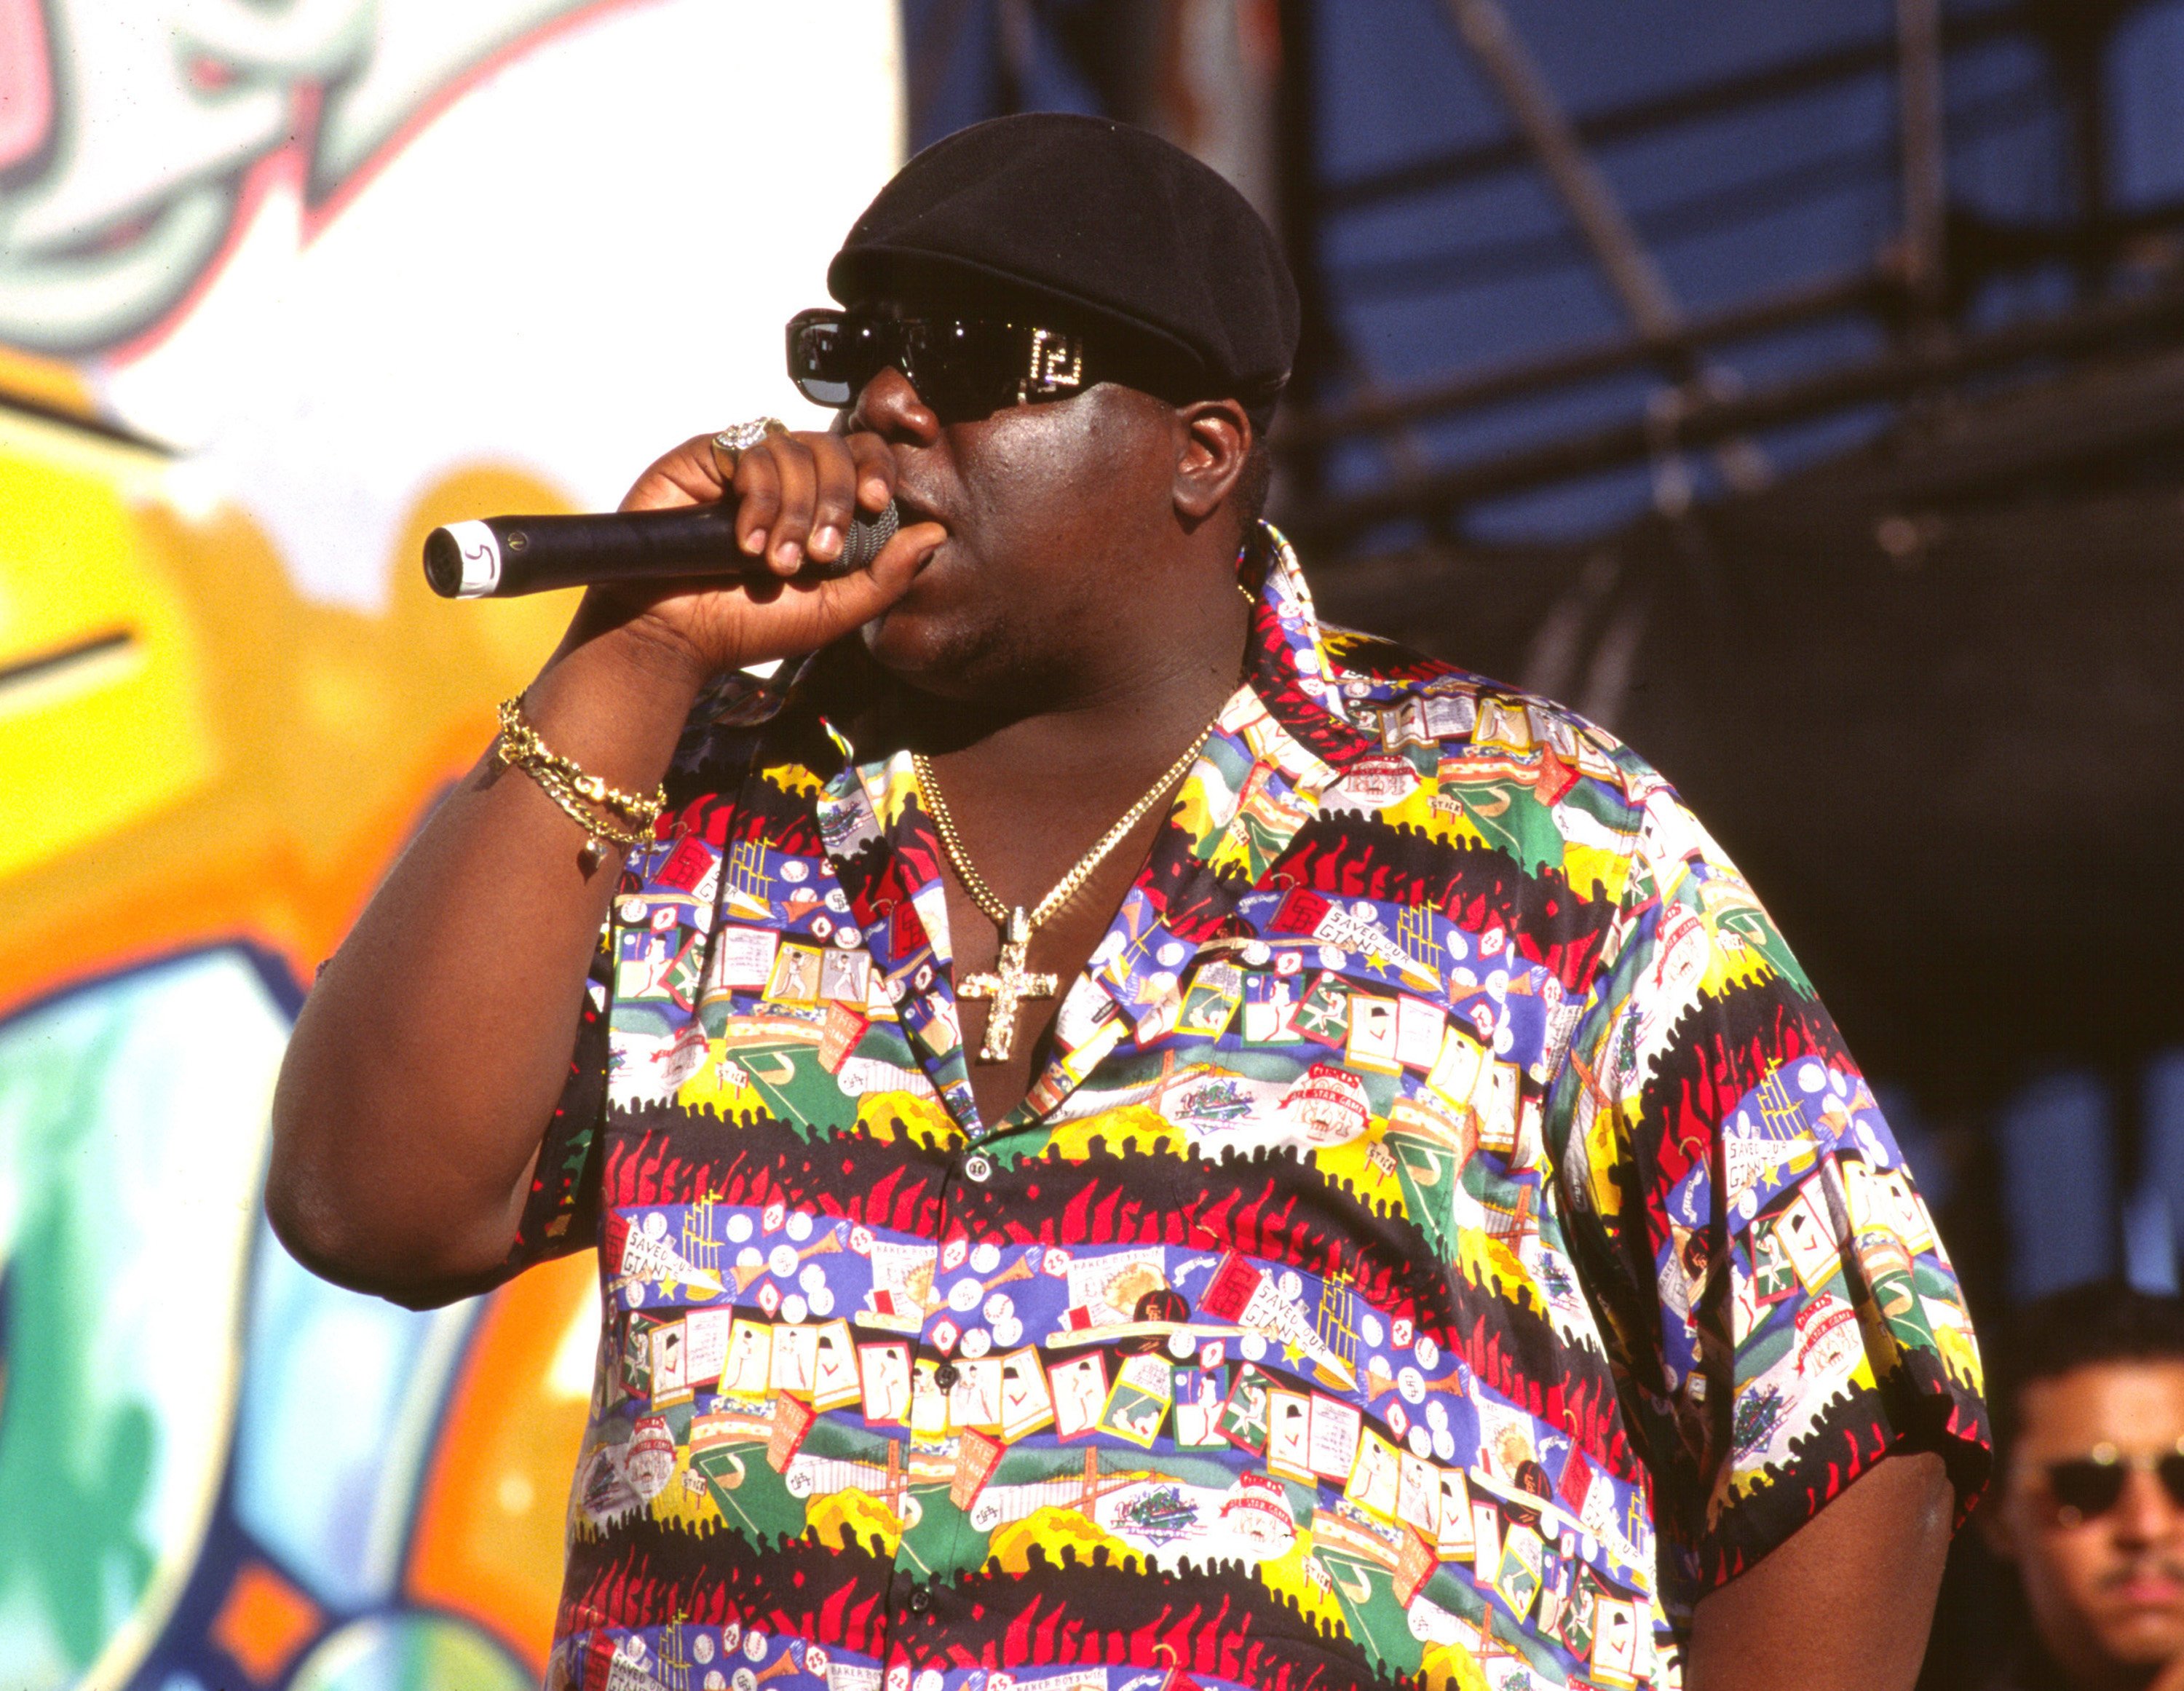 'I Got a Story to Tell' rapper The Notorious B.I.G. performing on stage